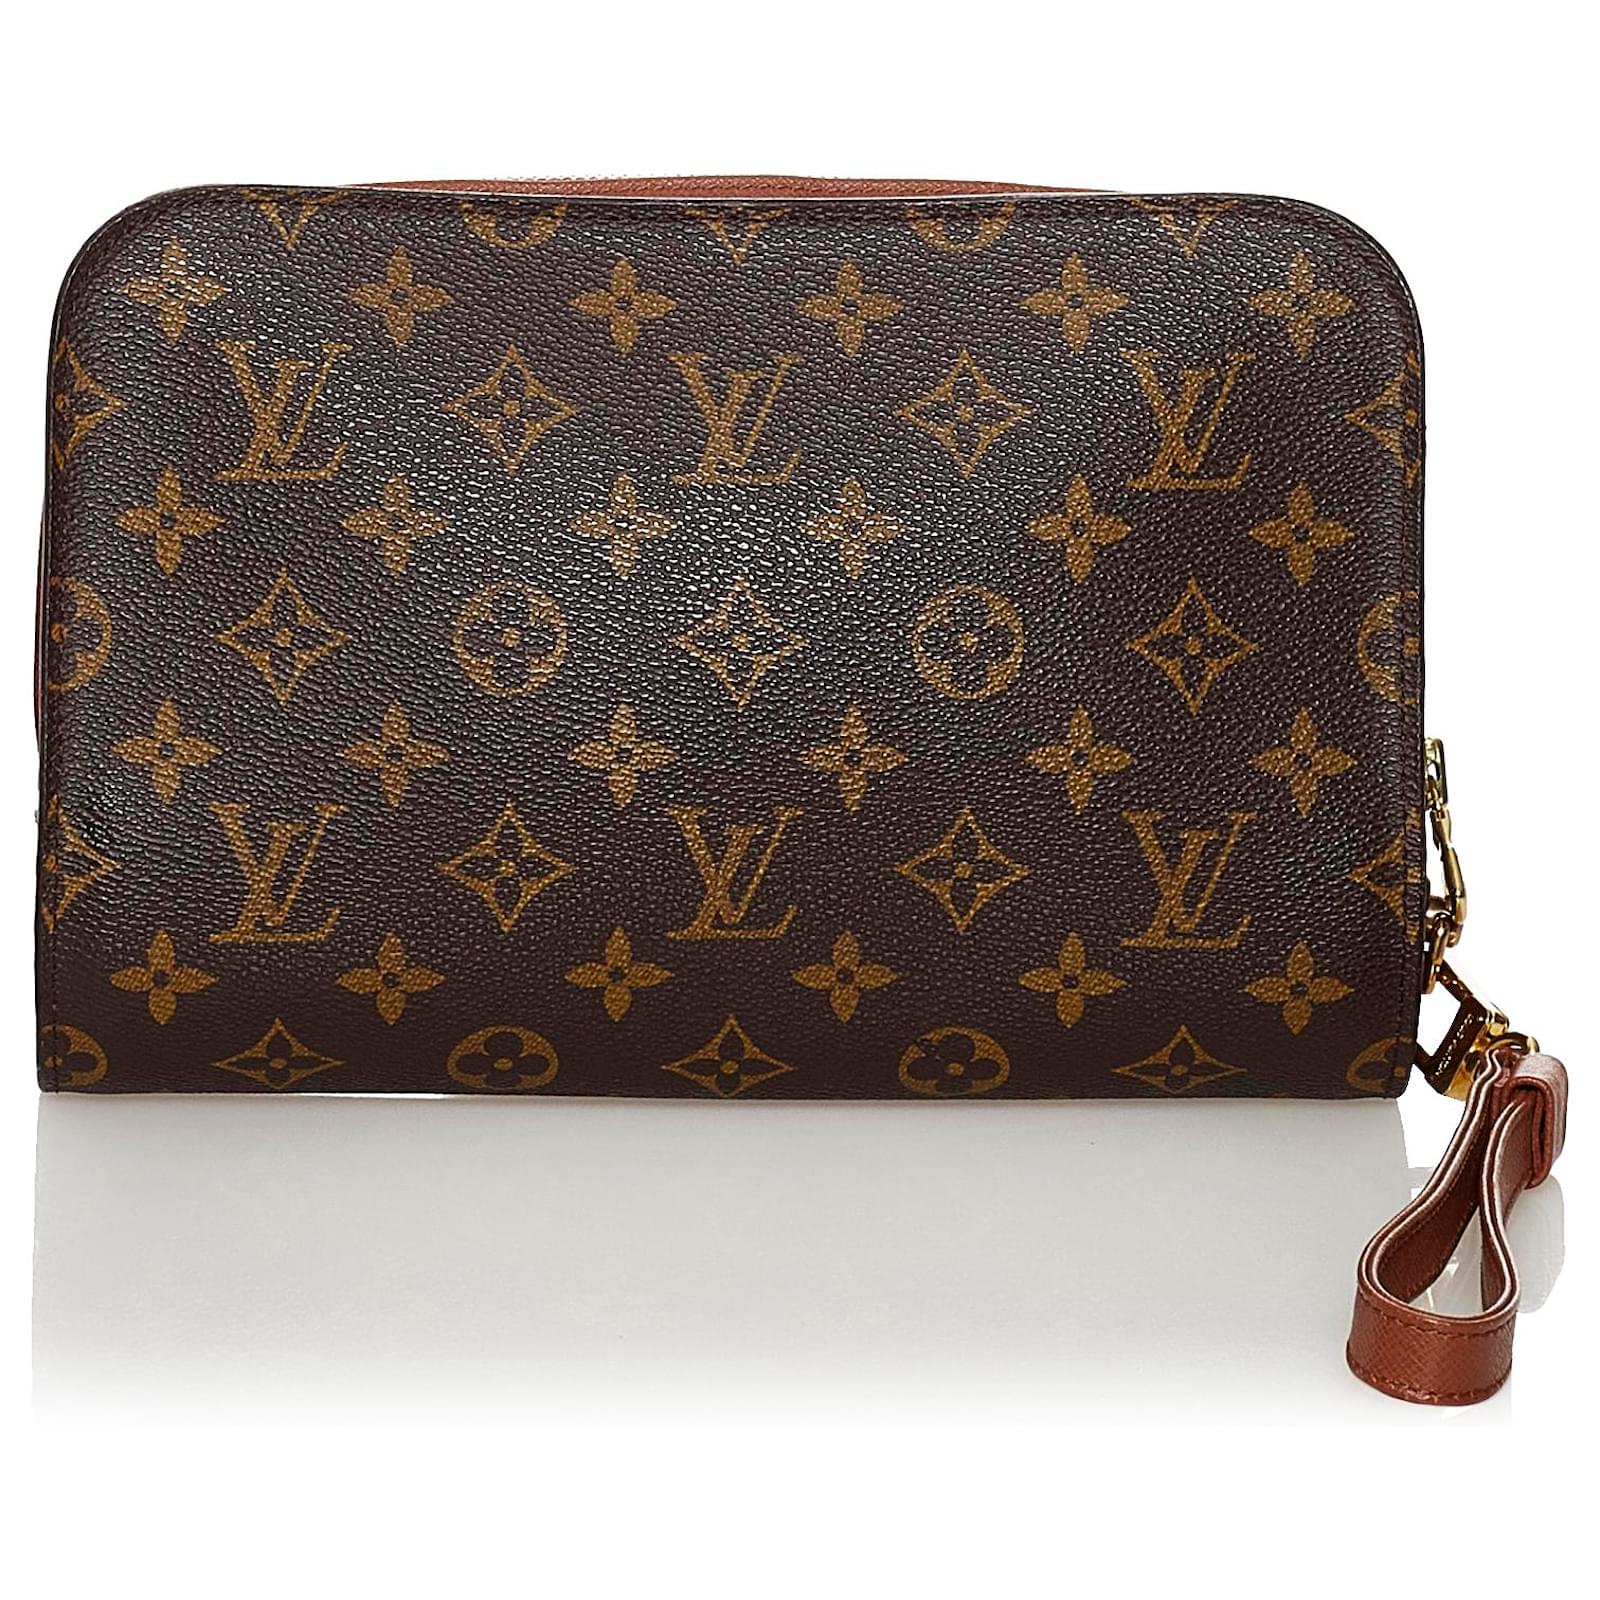 lv wallet with wrist strap